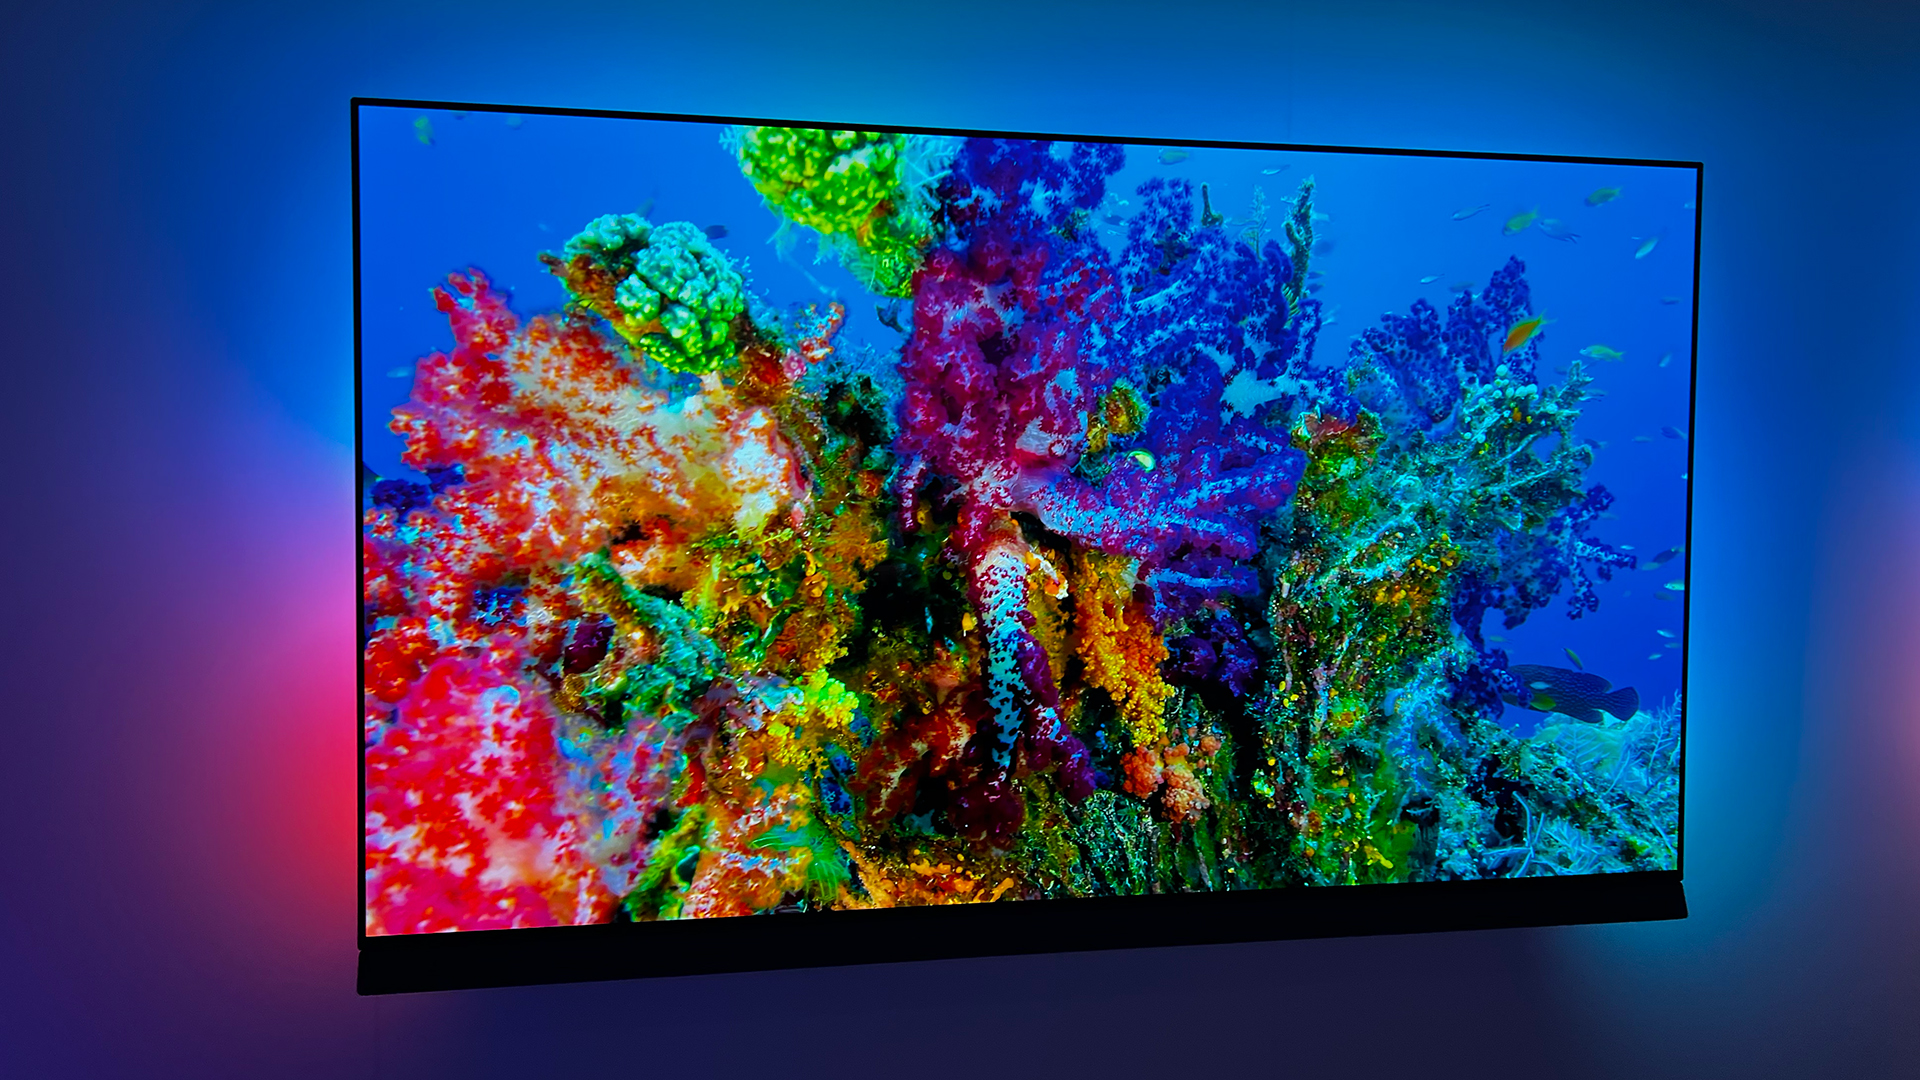 Philips 4K OLED TV: The world's only OLED TV with Ambilight 